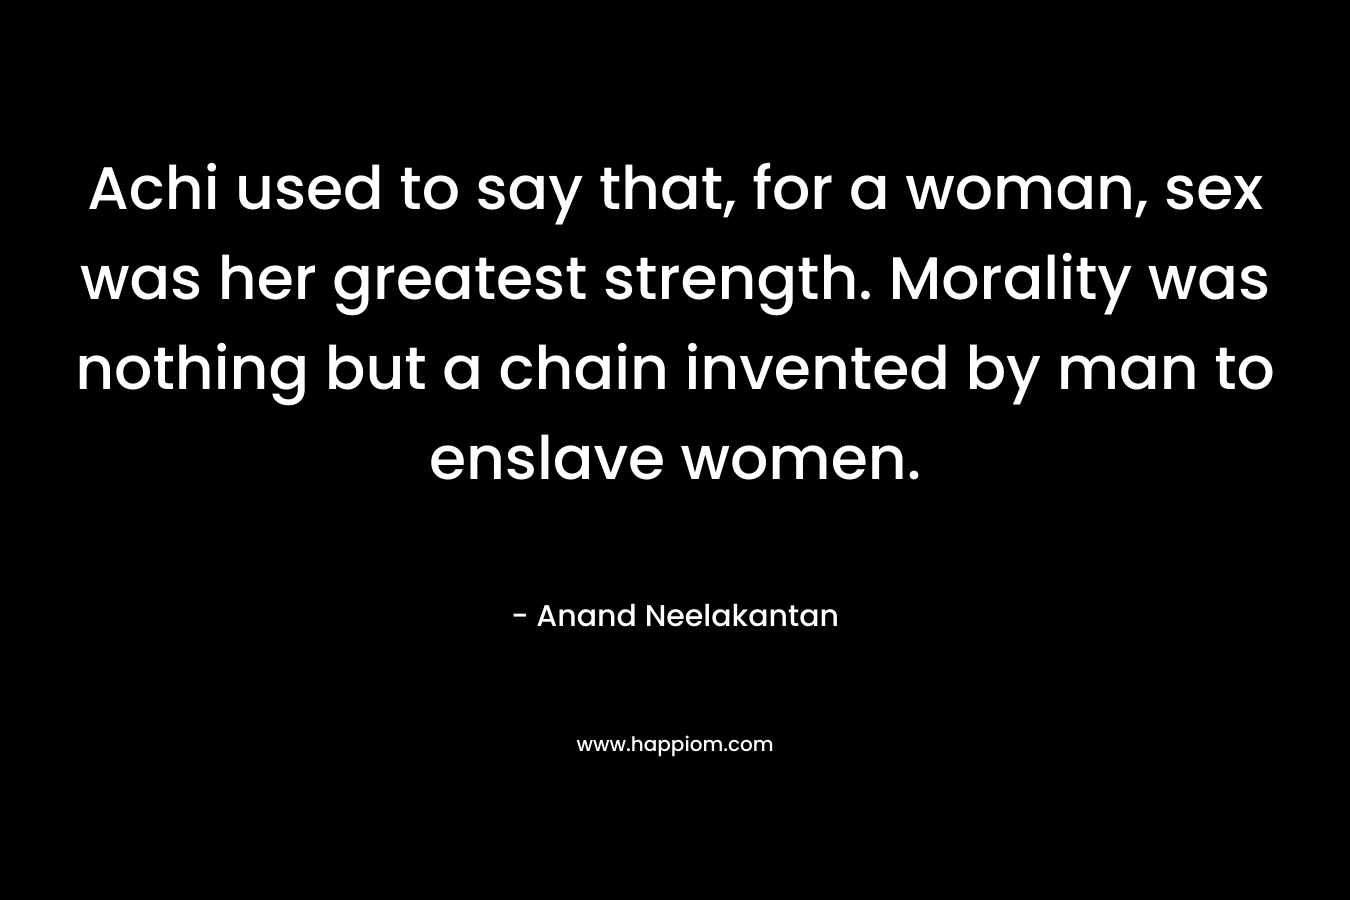 Achi used to say that, for a woman, sex was her greatest strength. Morality was nothing but a chain invented by man to enslave women. – Anand Neelakantan